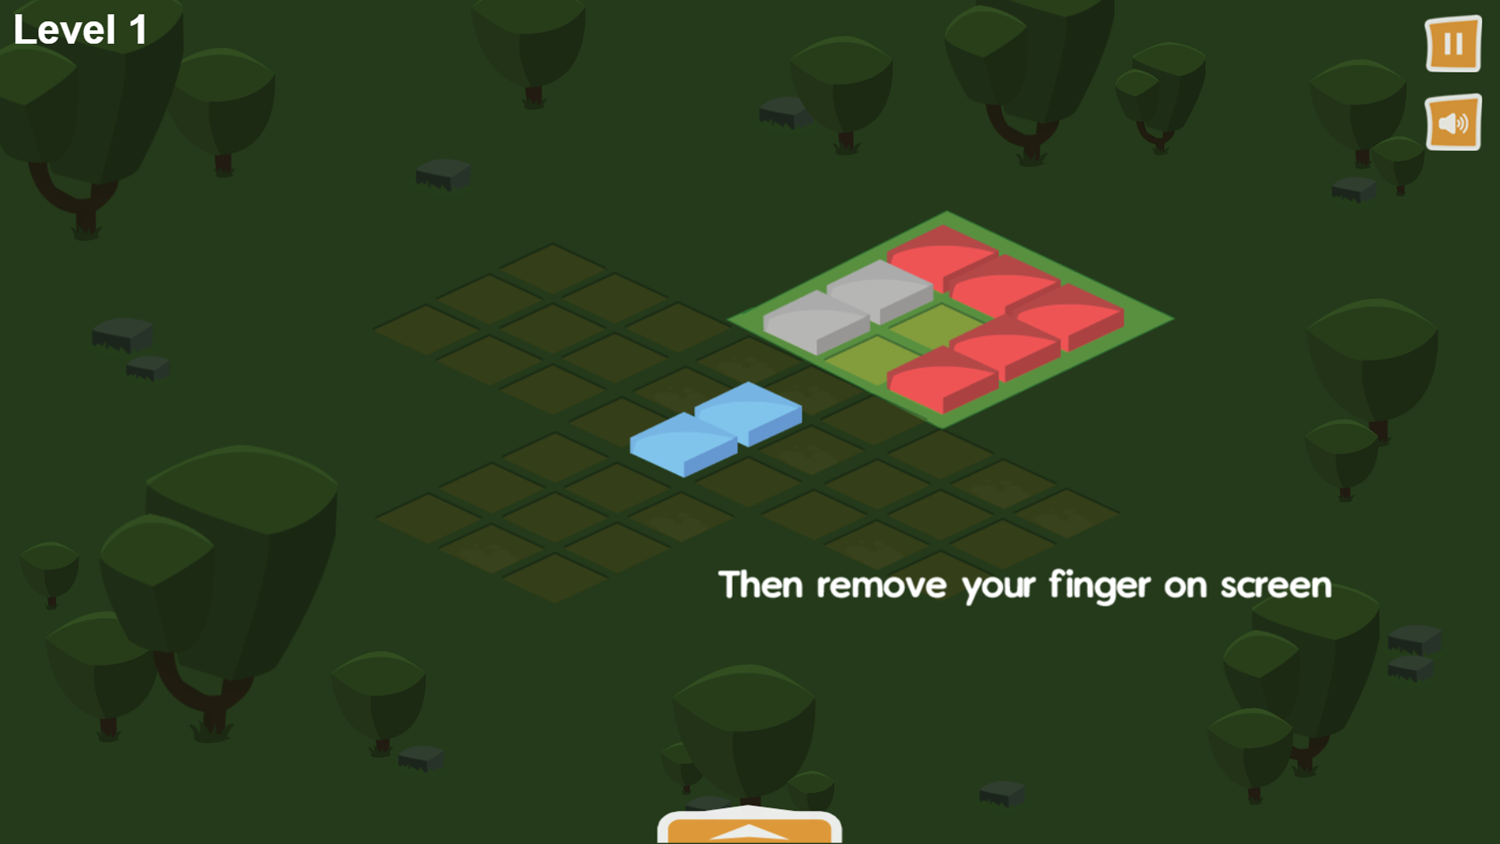 Isometric Puzzle Game Instructions Screenshot.